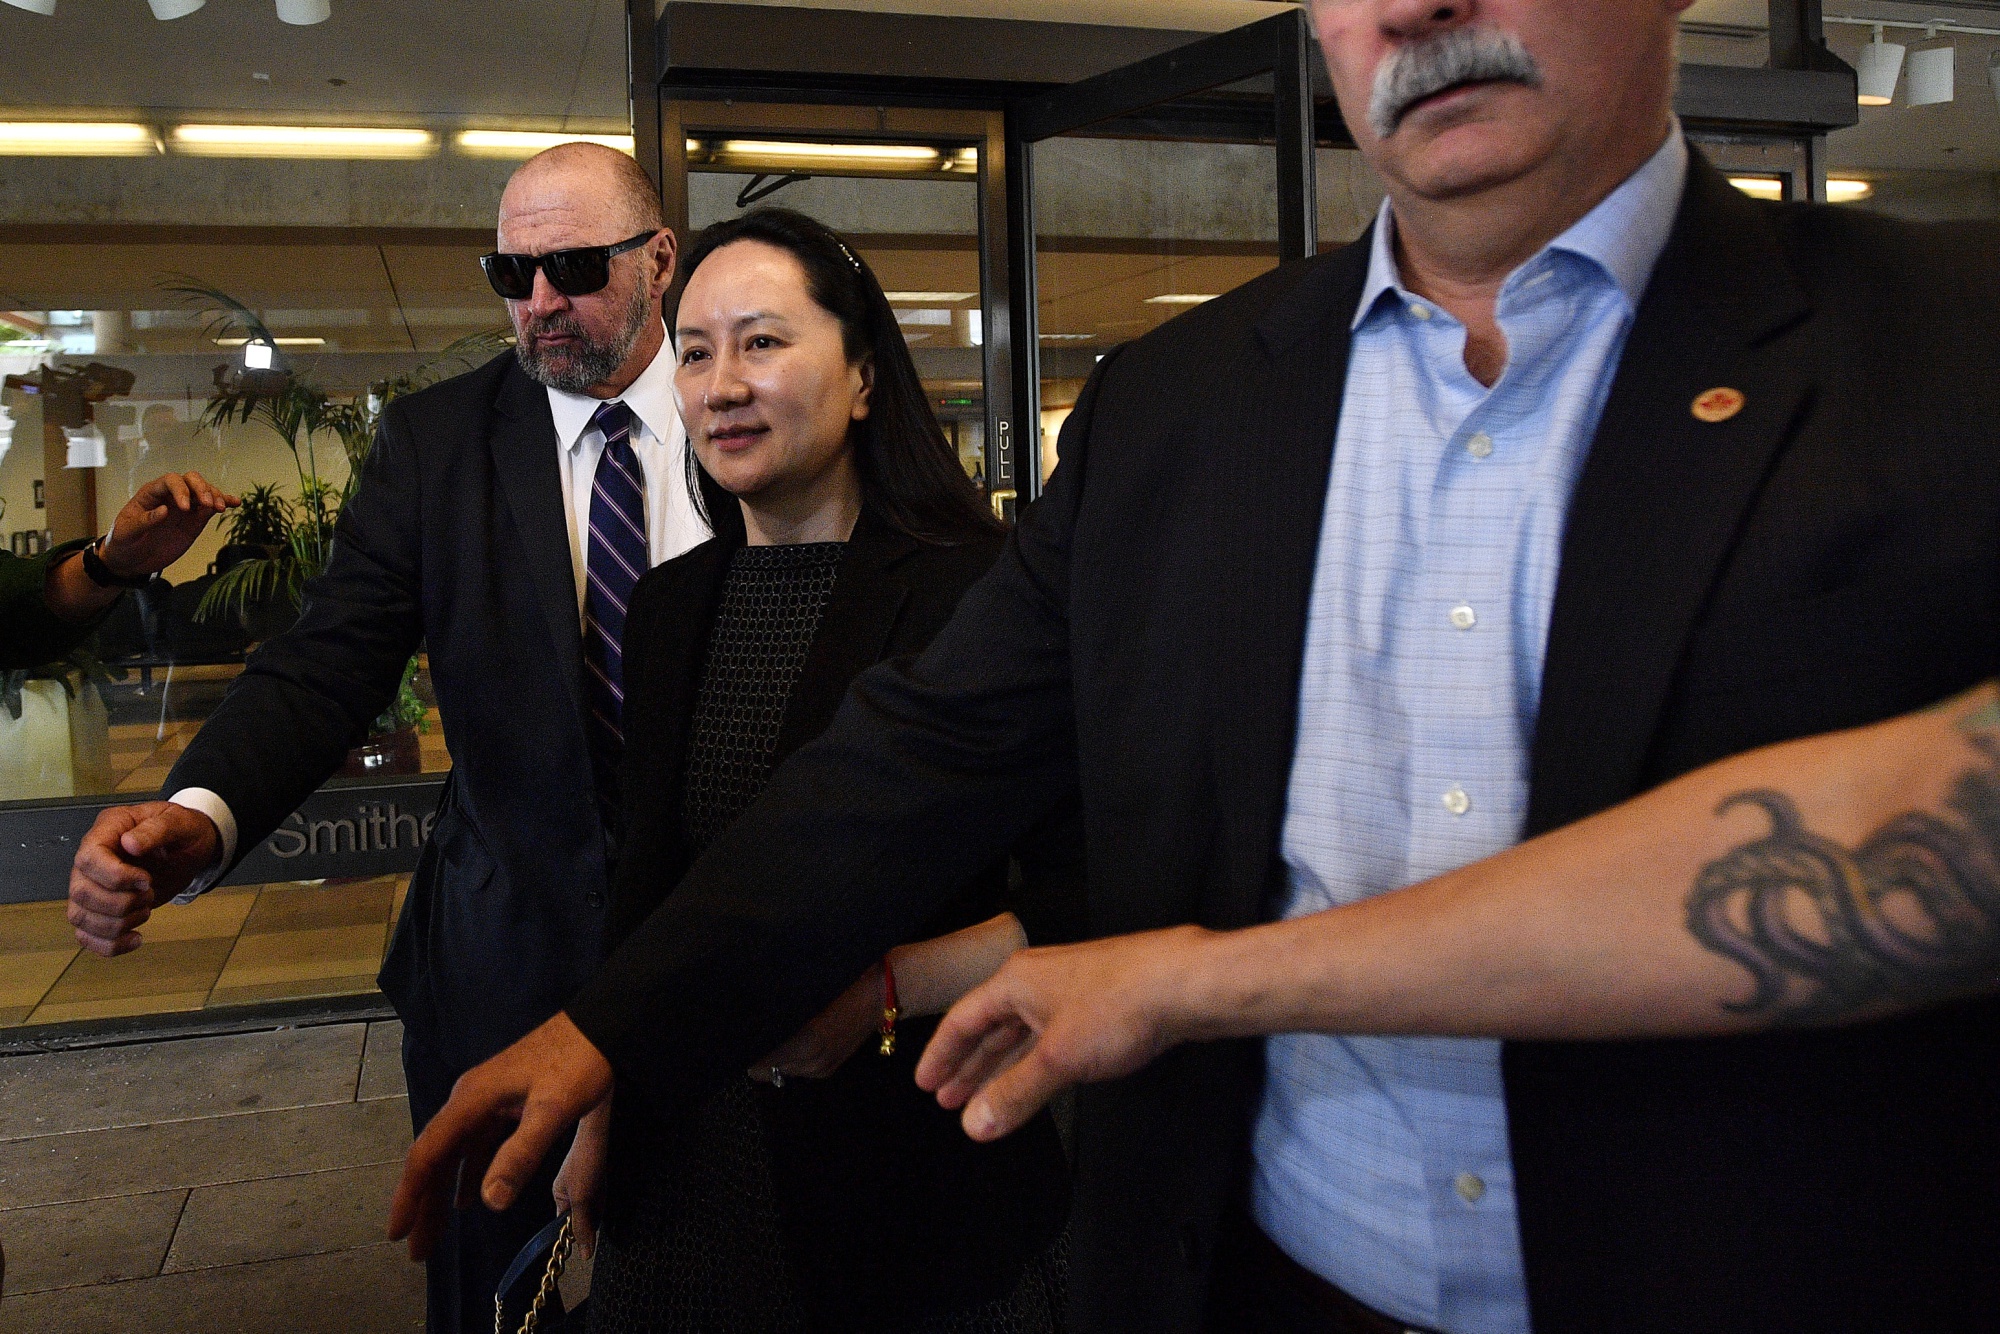 Meng Wanzhou, chief financial officer of Huawei Technologies Co., leaves the Supreme Court following a hearing in Vancouver, British Columbia, Canada, on Wednesday, May 8, 2019.